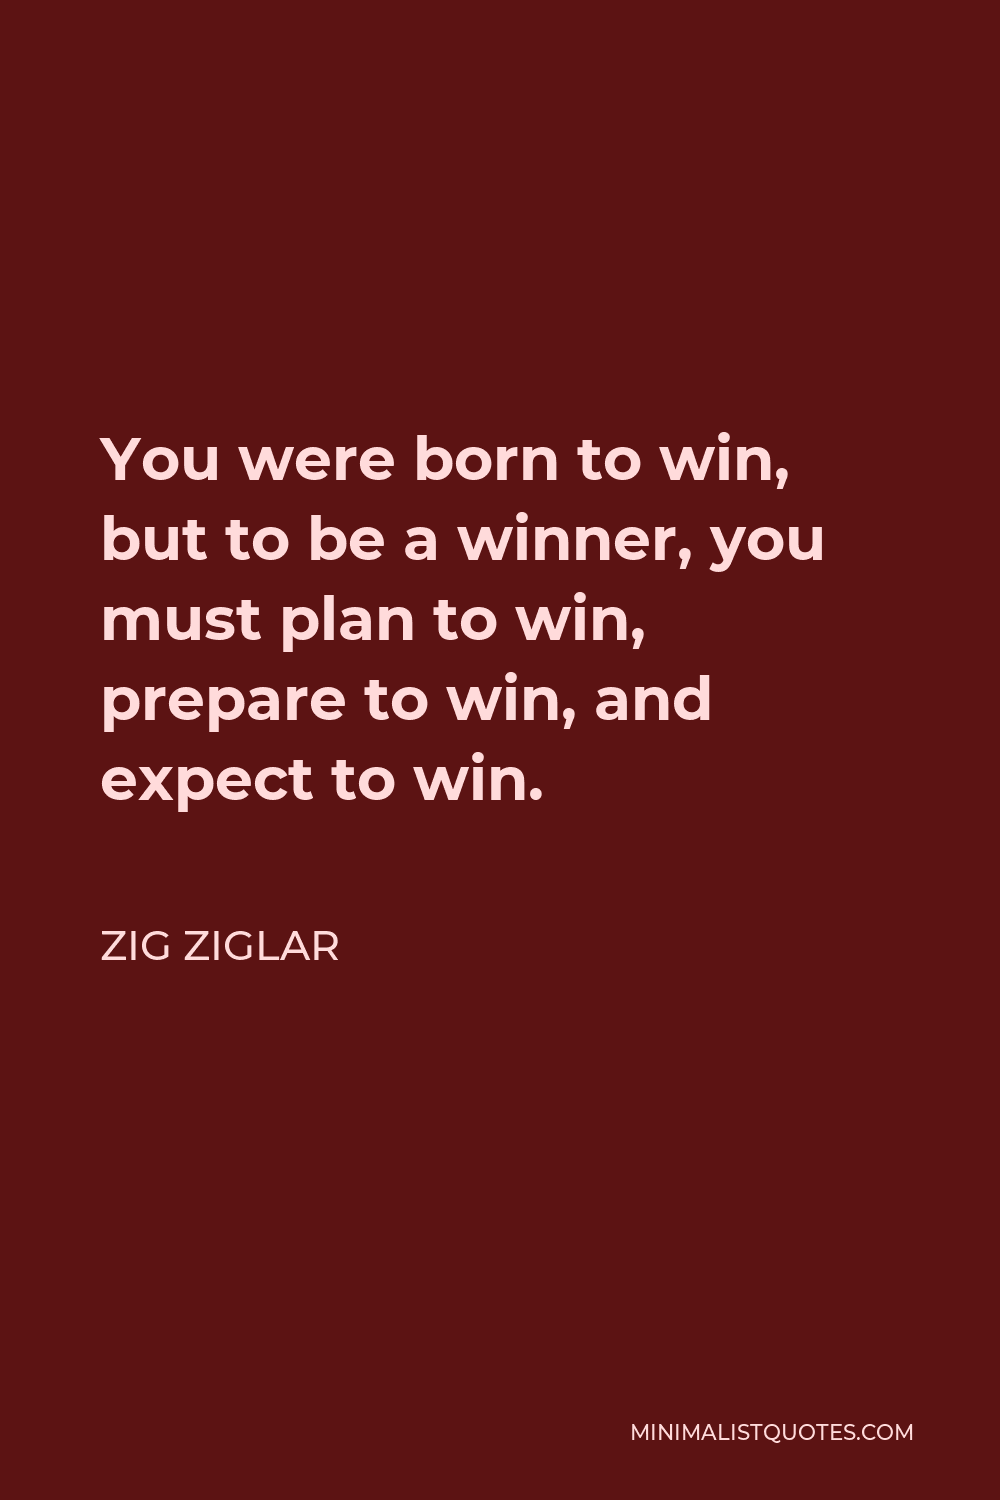 Zig Ziglar Quote - You were born to win, but to be a winner, you must plan to win, prepare to win, and expect to win.